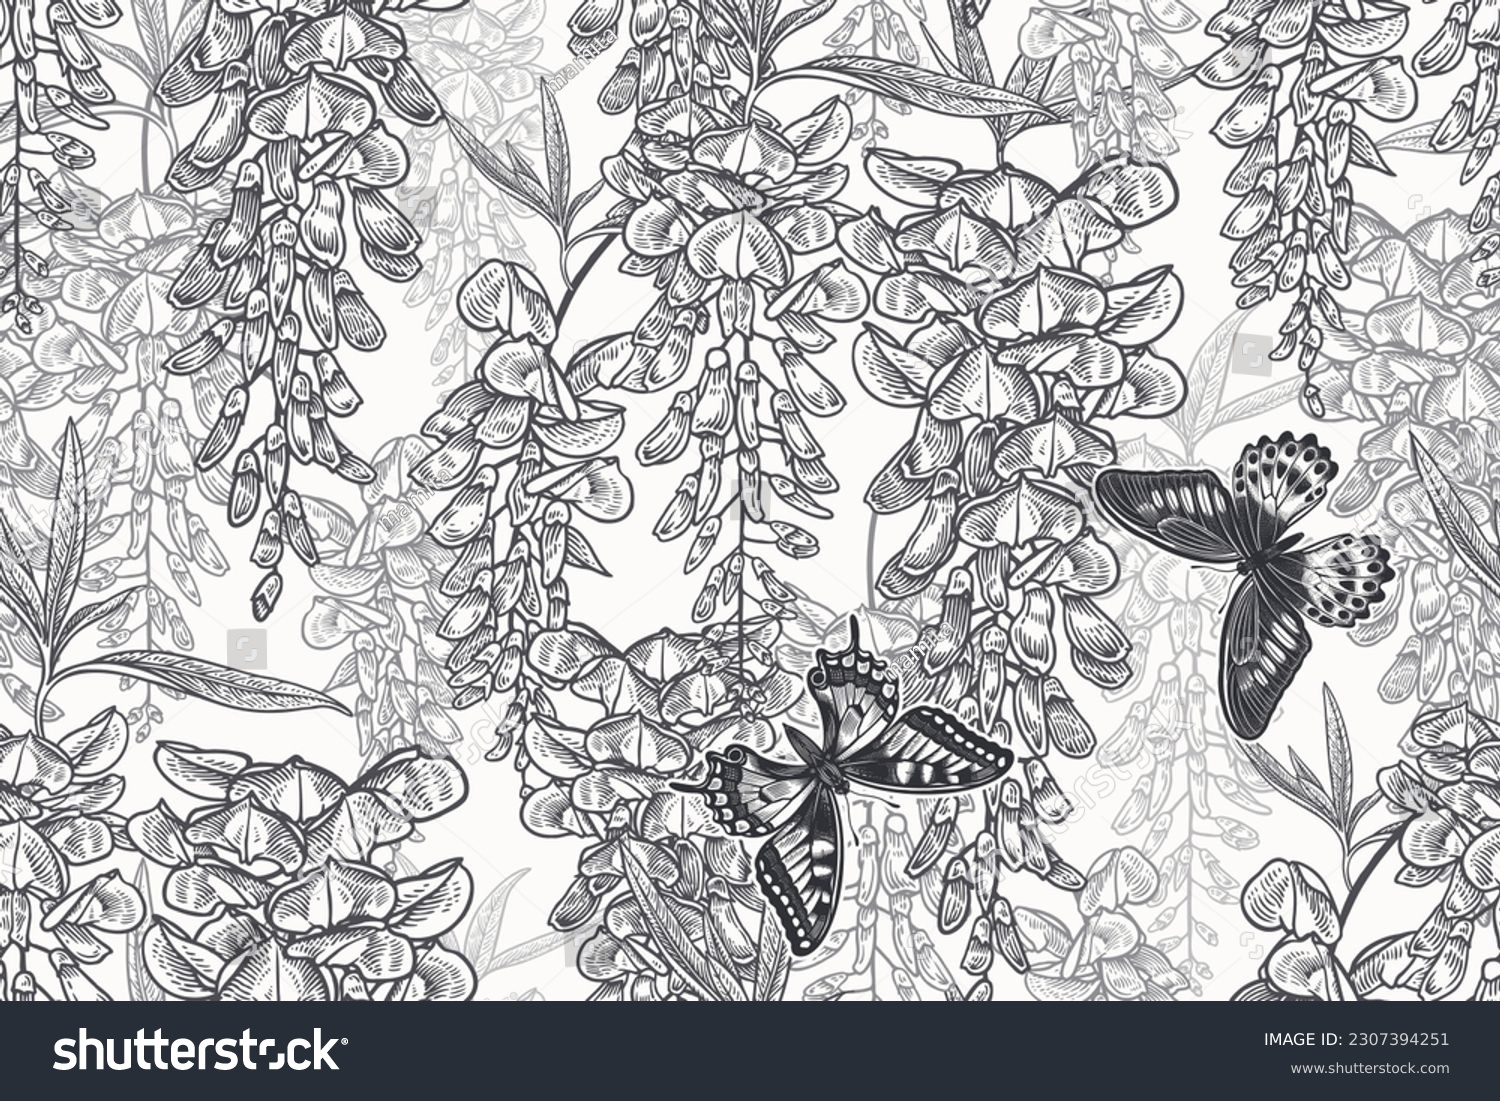 SVG of Butterflies and branches of tree. Wisteria liana. Floral seamless pattern. Garden flowers and leaves. Black and white. Vector illustration. Vintage decor. svg